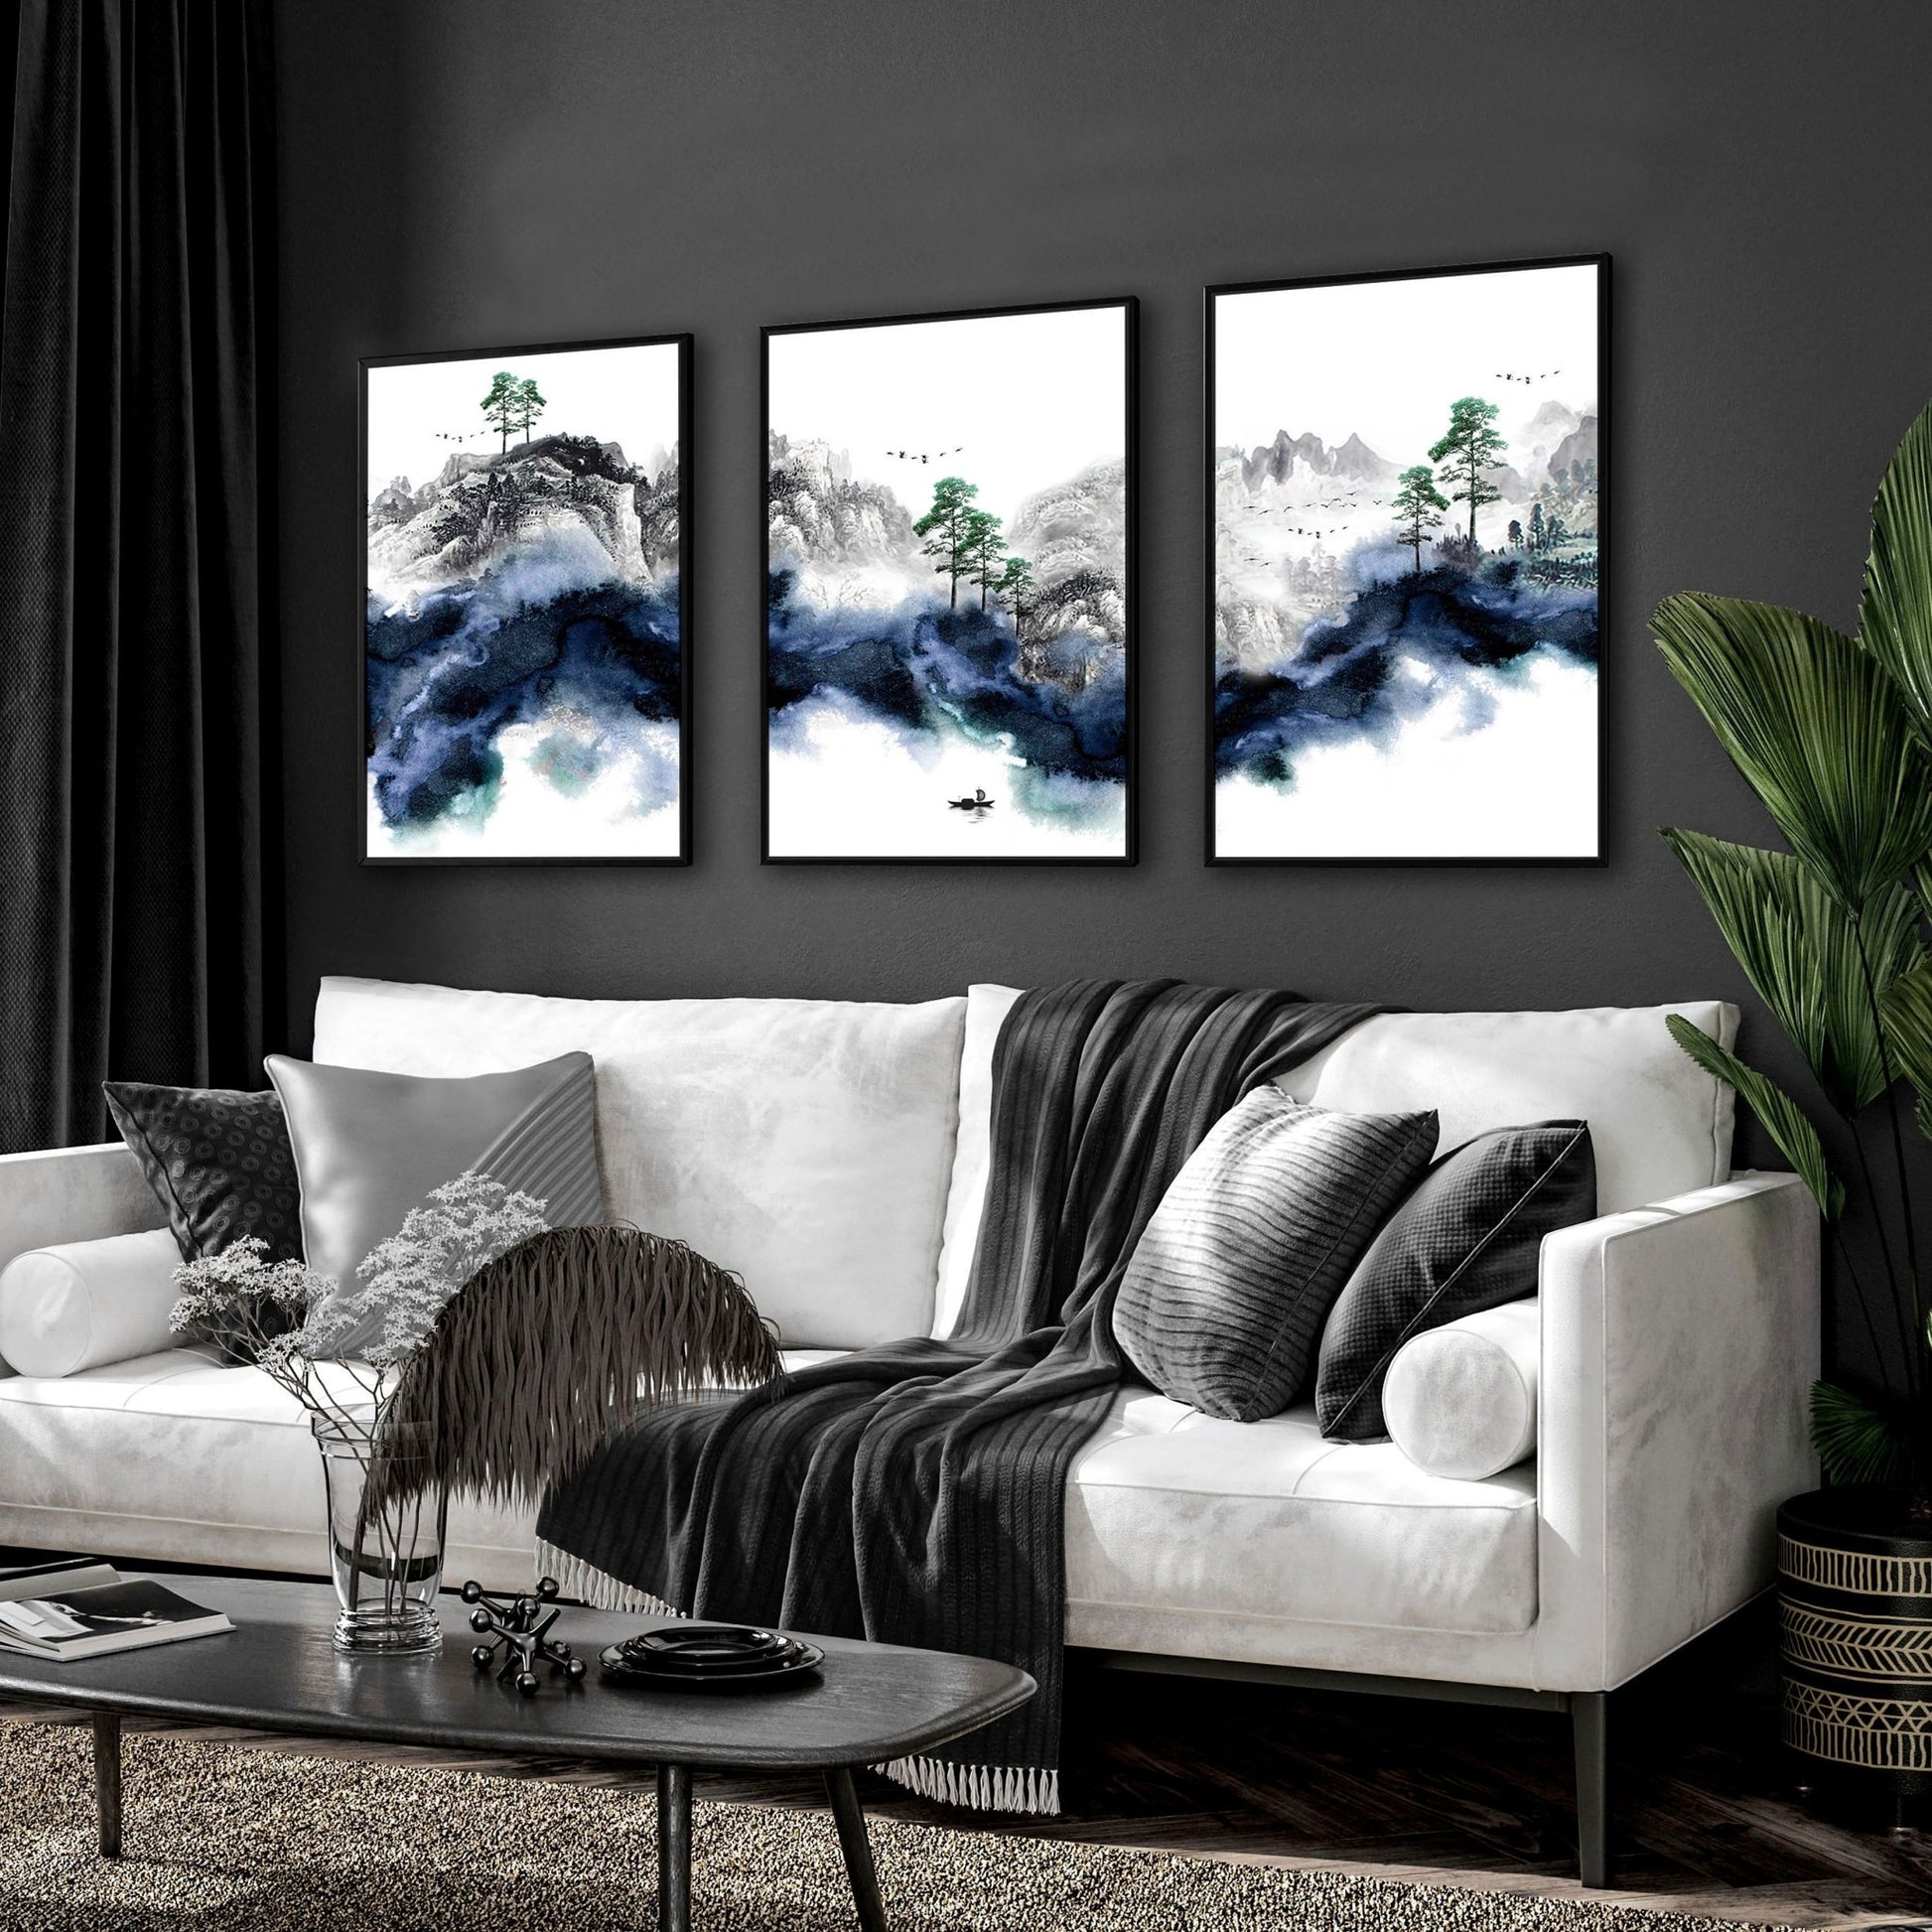 Japanese wall picture for living room | set of 3 art prints - About Wall Art